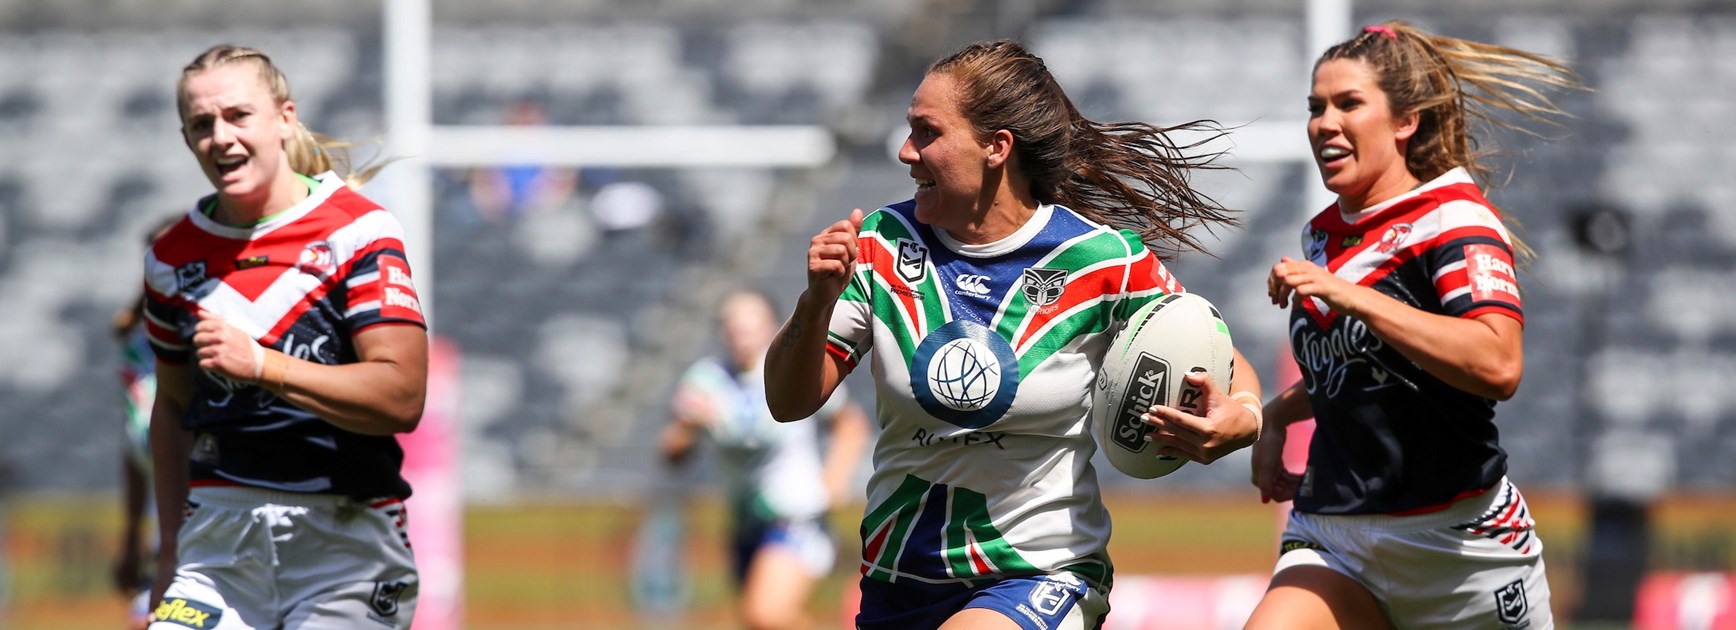 NRLW Try of the Year: Pelite's pace too much for Roosters